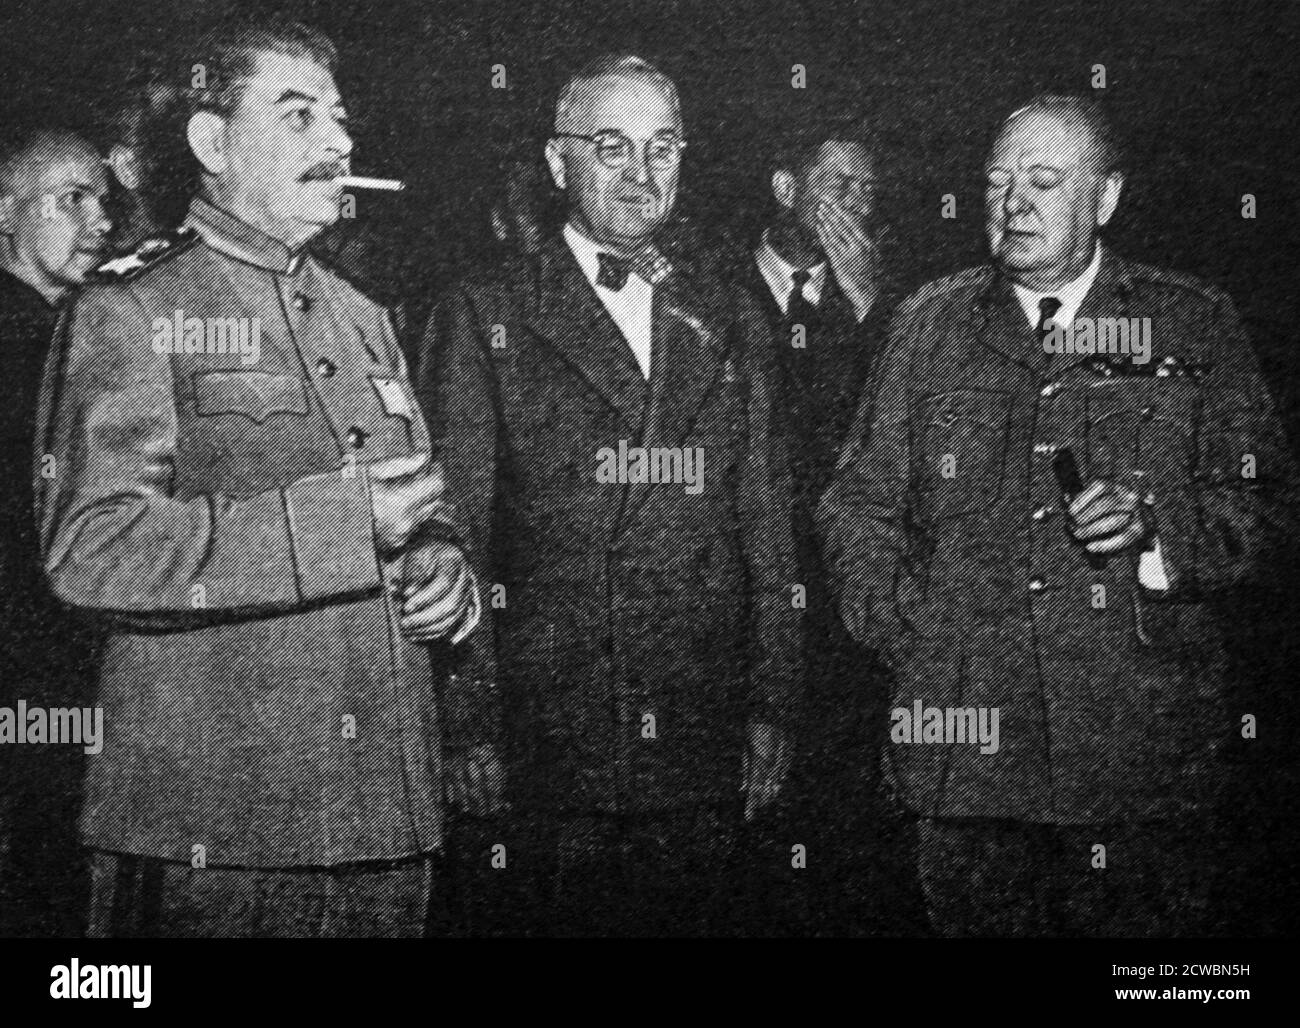 Black and white photograph of World War II (1939-1945) showing Soviet leader Josef Stalin (1878-1953), US President Harry S. Truman (1884-1972) and British Prime Minister Sir Winston Churchill (1874-1965) at the Potsdam Conference in July 1945. Stock Photo